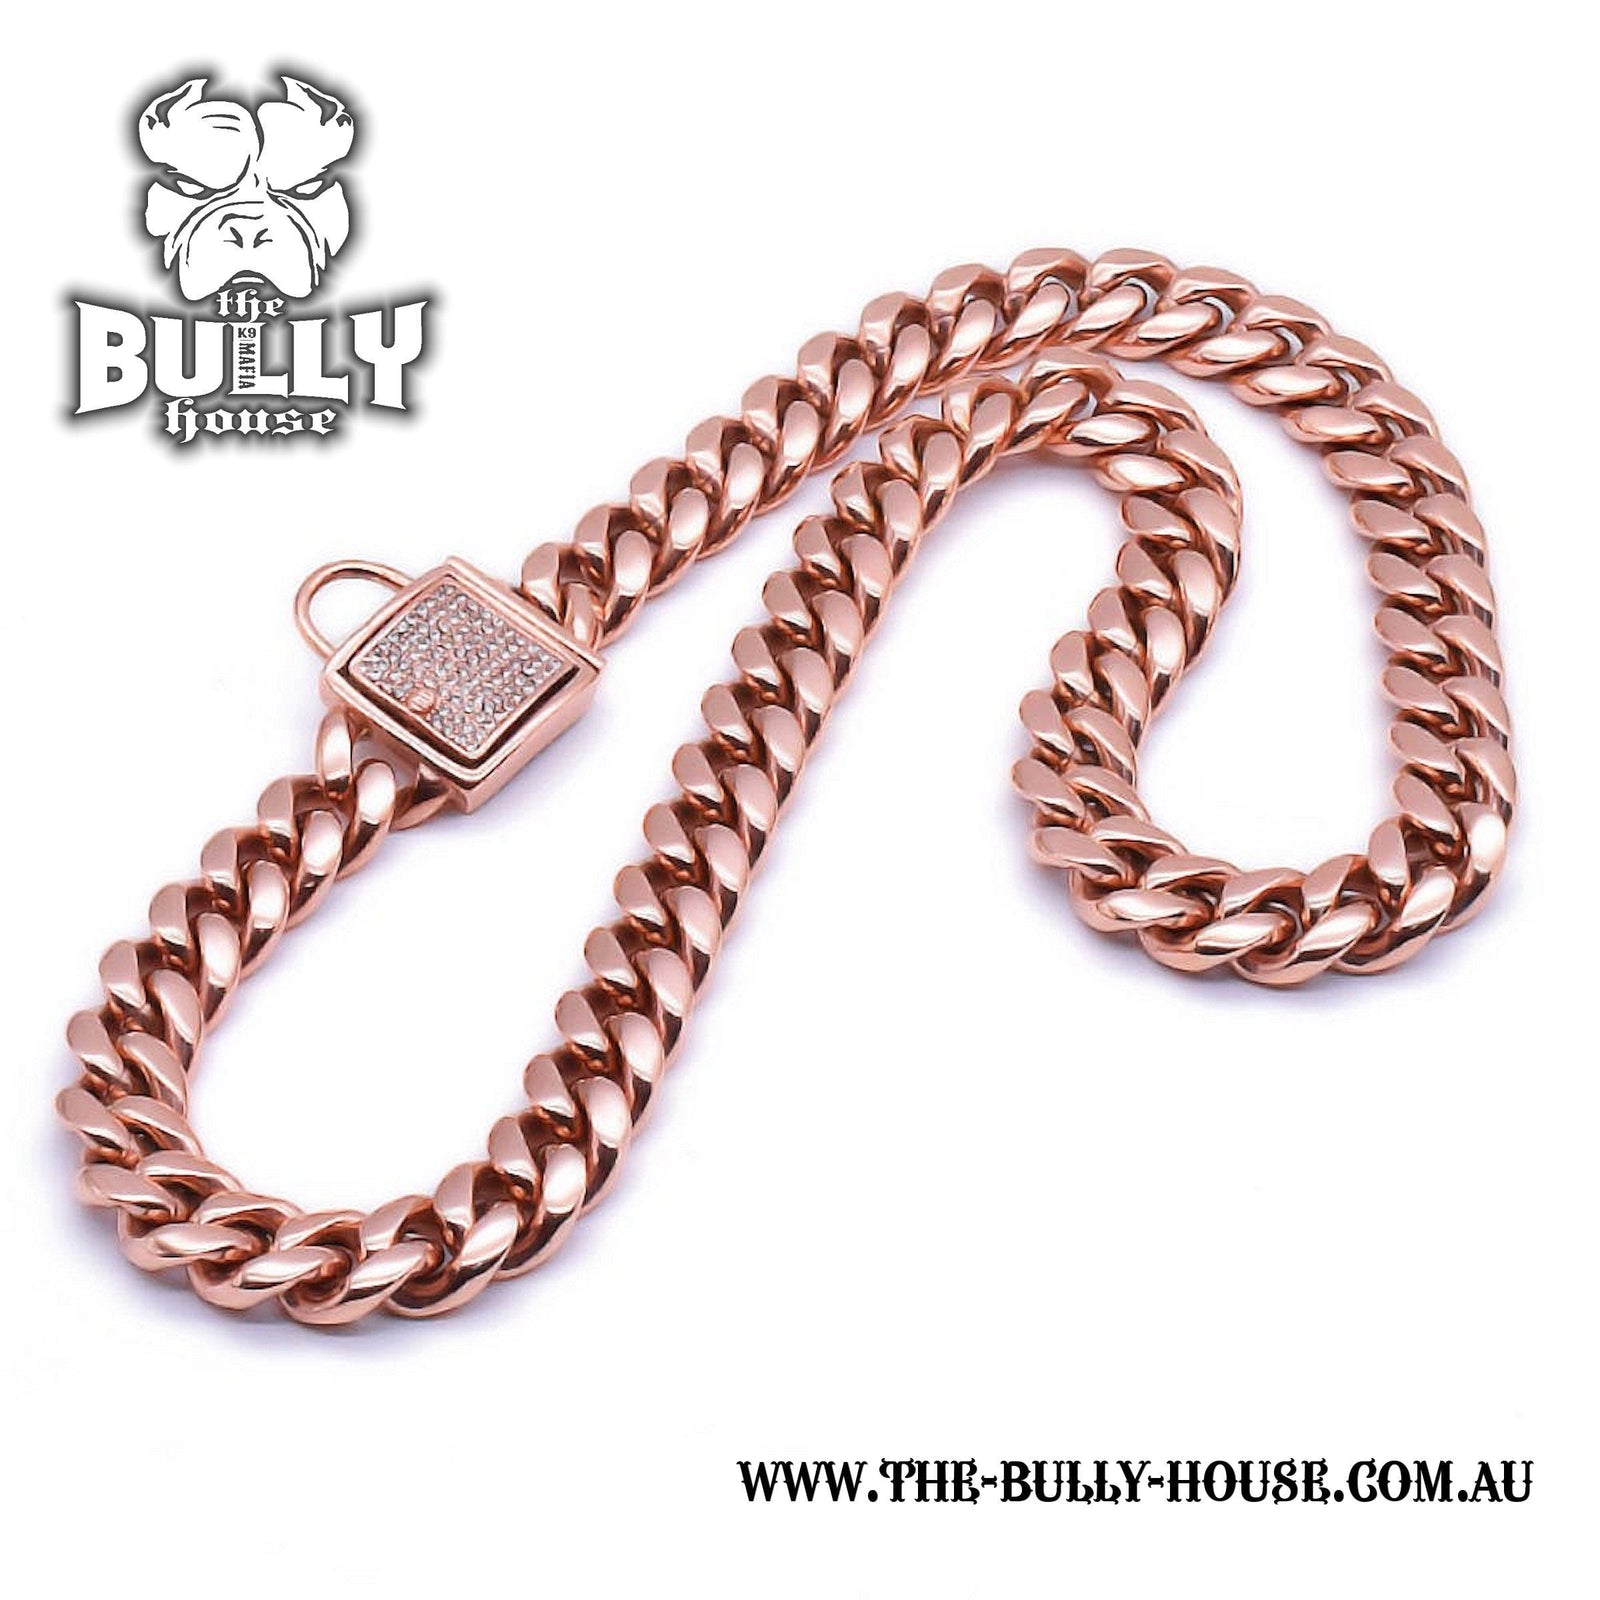 The Bully House "MIAMI Diamond Padlock" - ROSE GOLD 14mm Wide -